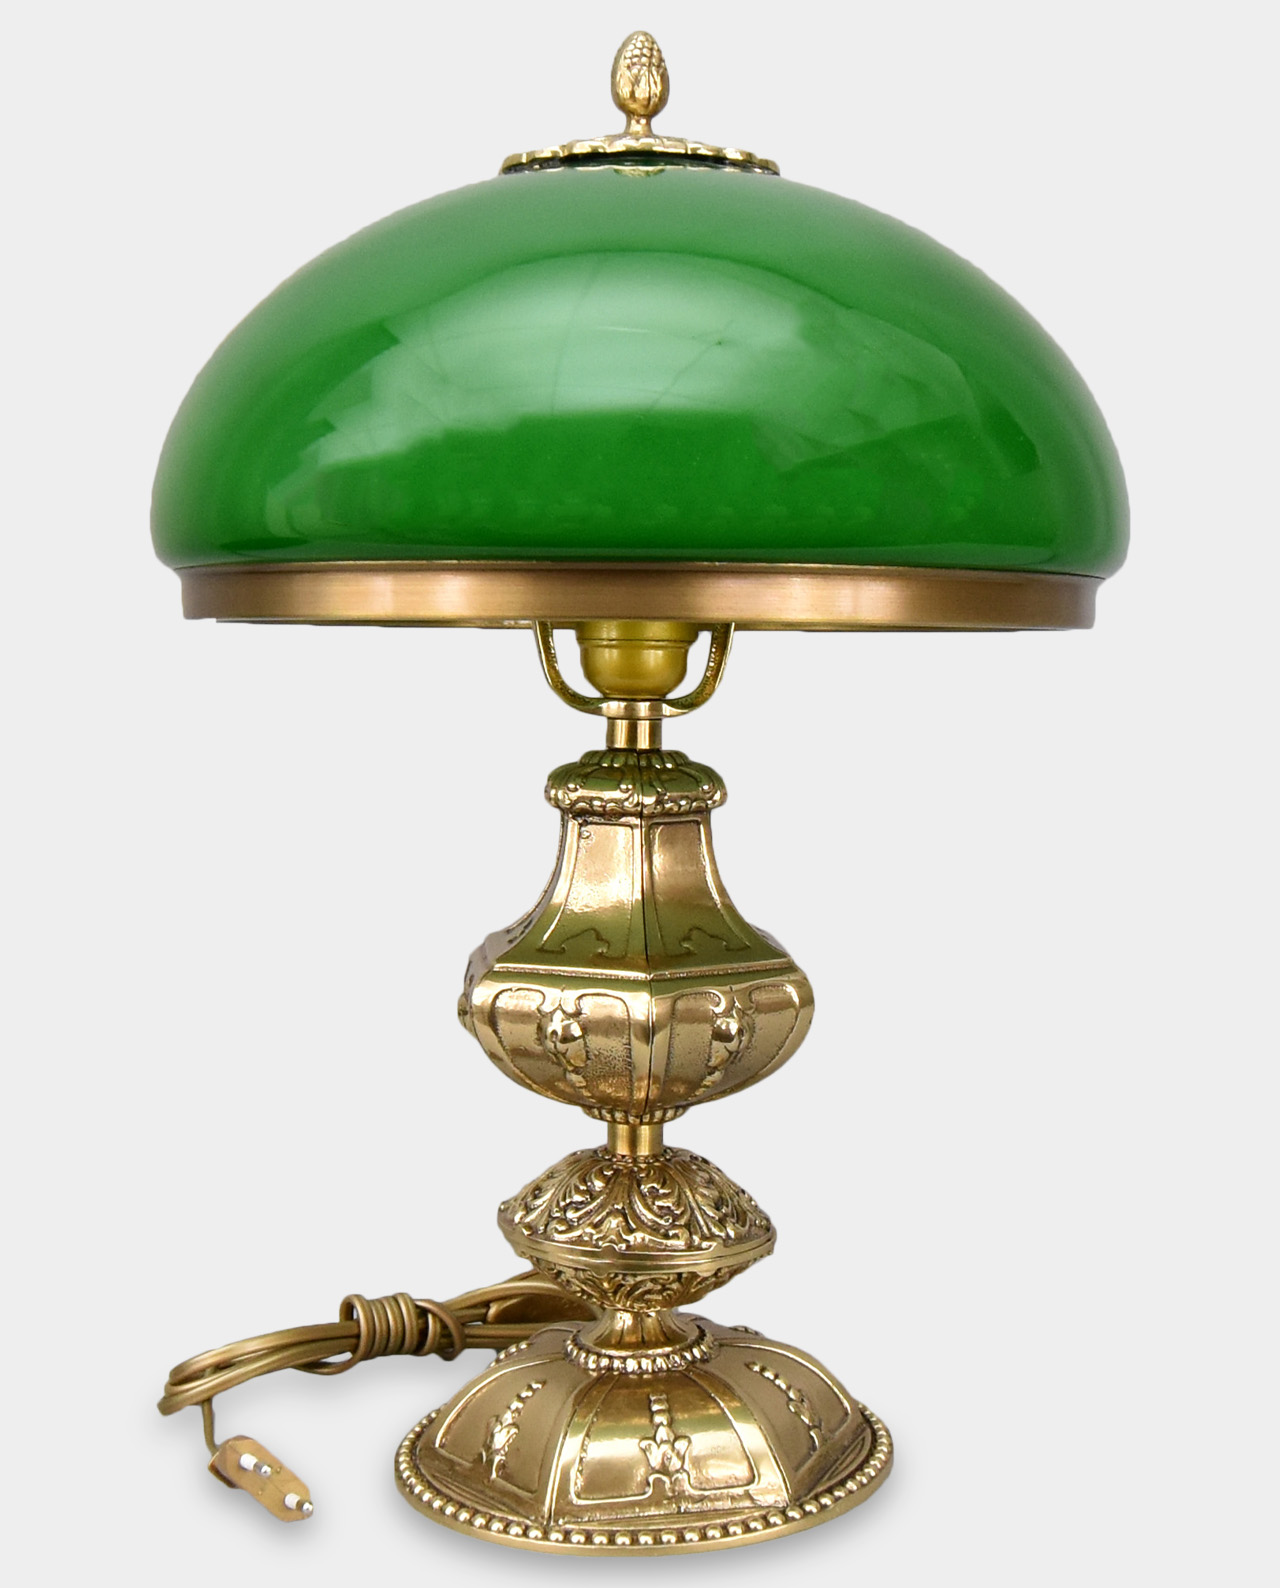 ArArt Deco Table Lamp Polished Brass Green Lamp Shade Gold Look Richly Base